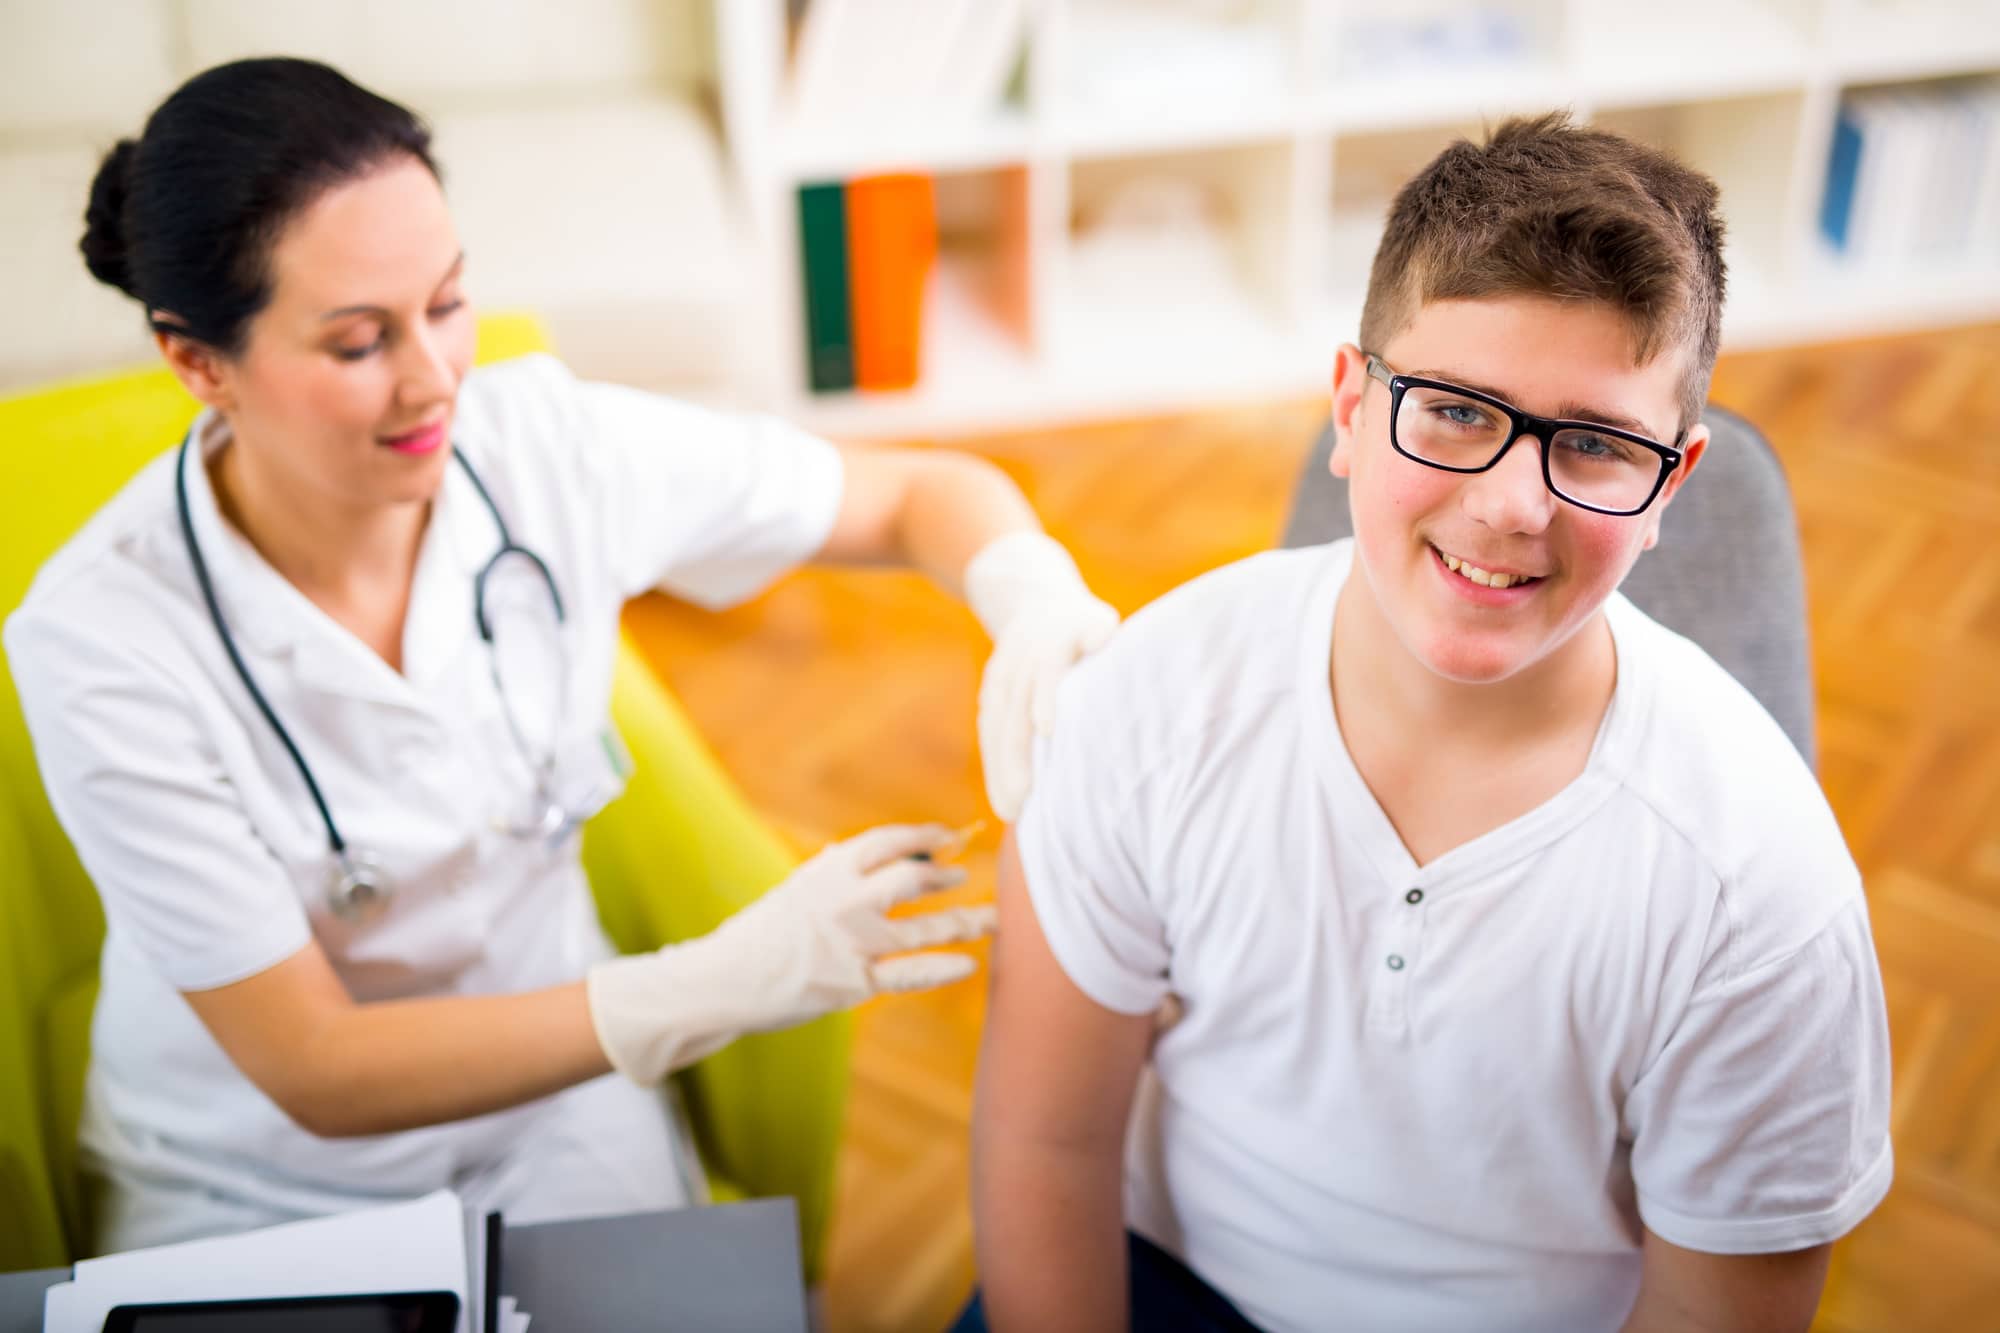 Teenage boy getting vaccination in his arm